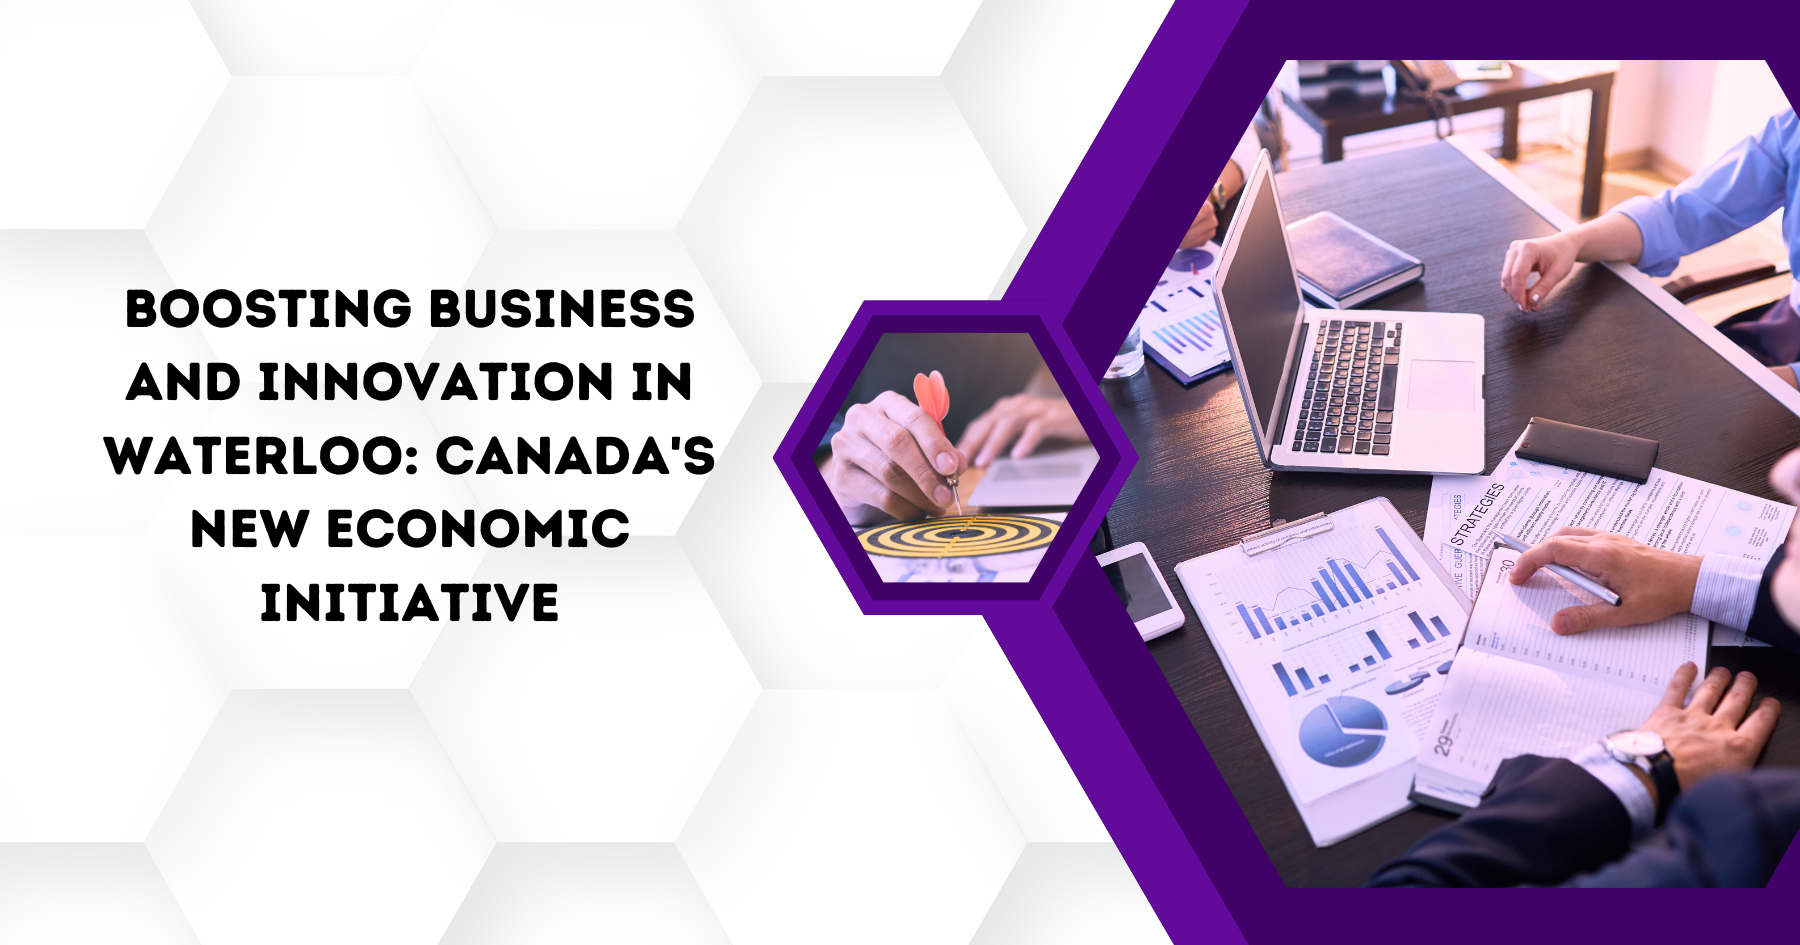 Boosting Business and Innovation in Waterloo Canada's New Economic Initiative